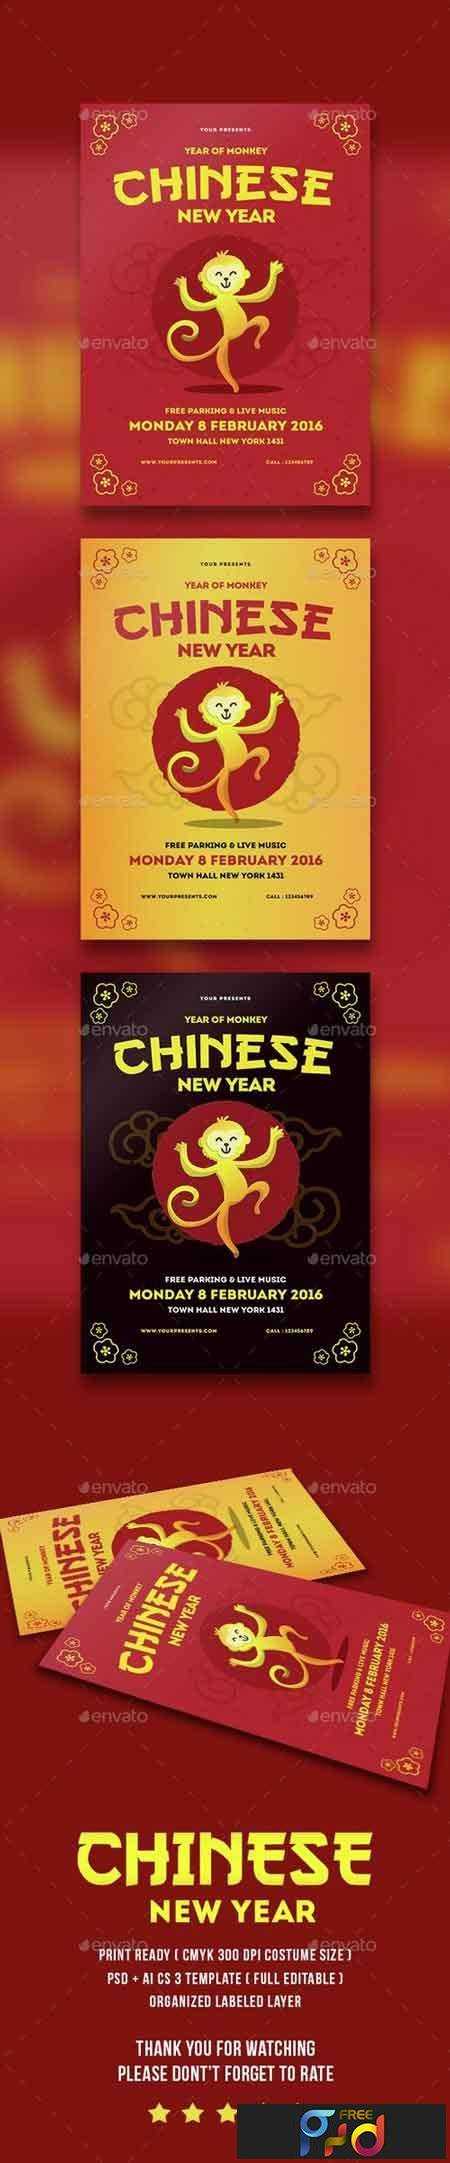 FreePsdVn.com 1802053 TEMPLATE chinese new year 14555017